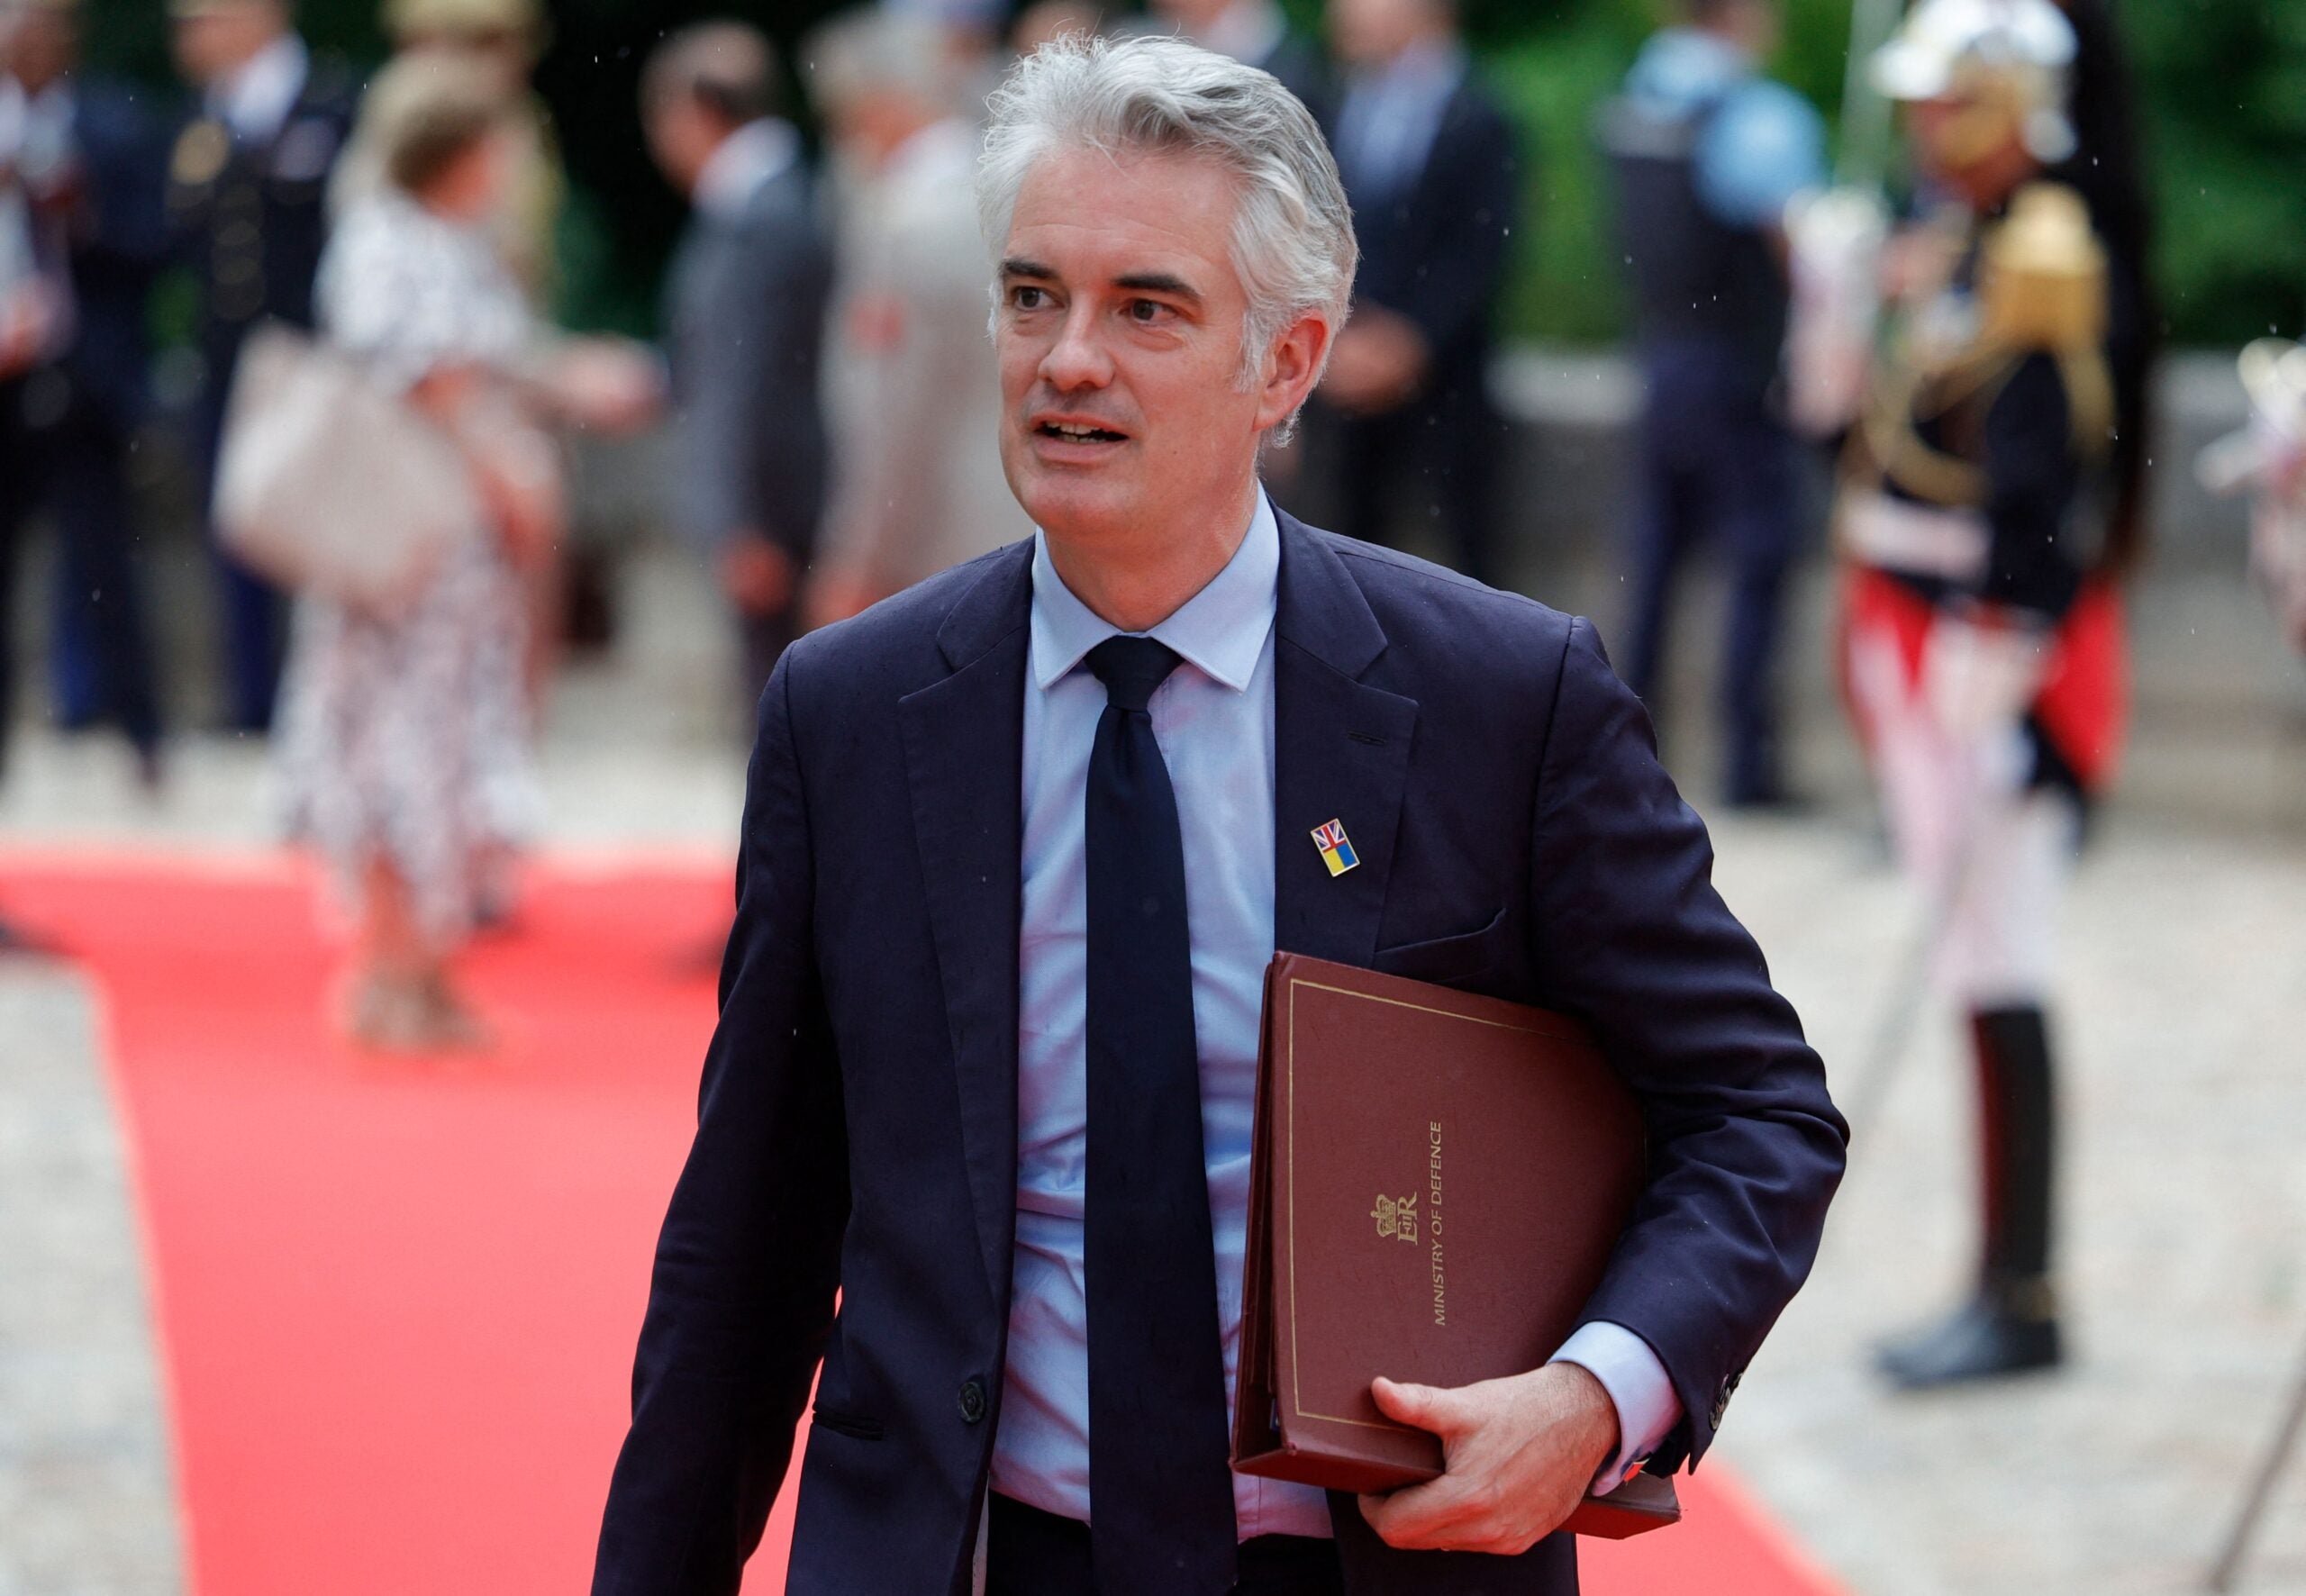 UK minister of State (Minister for Defence Procurement) James Cartlidge arrives to attend the European Air Defence Conference with 18 foreign counterparts, at Les Invalides in Paris on June 19, 2023. (Photo by Geoffroy VAN DER HASSELT / AFP) (Photo by GEOFFROY VAN DER HASSELT/AFP via Getty Images)